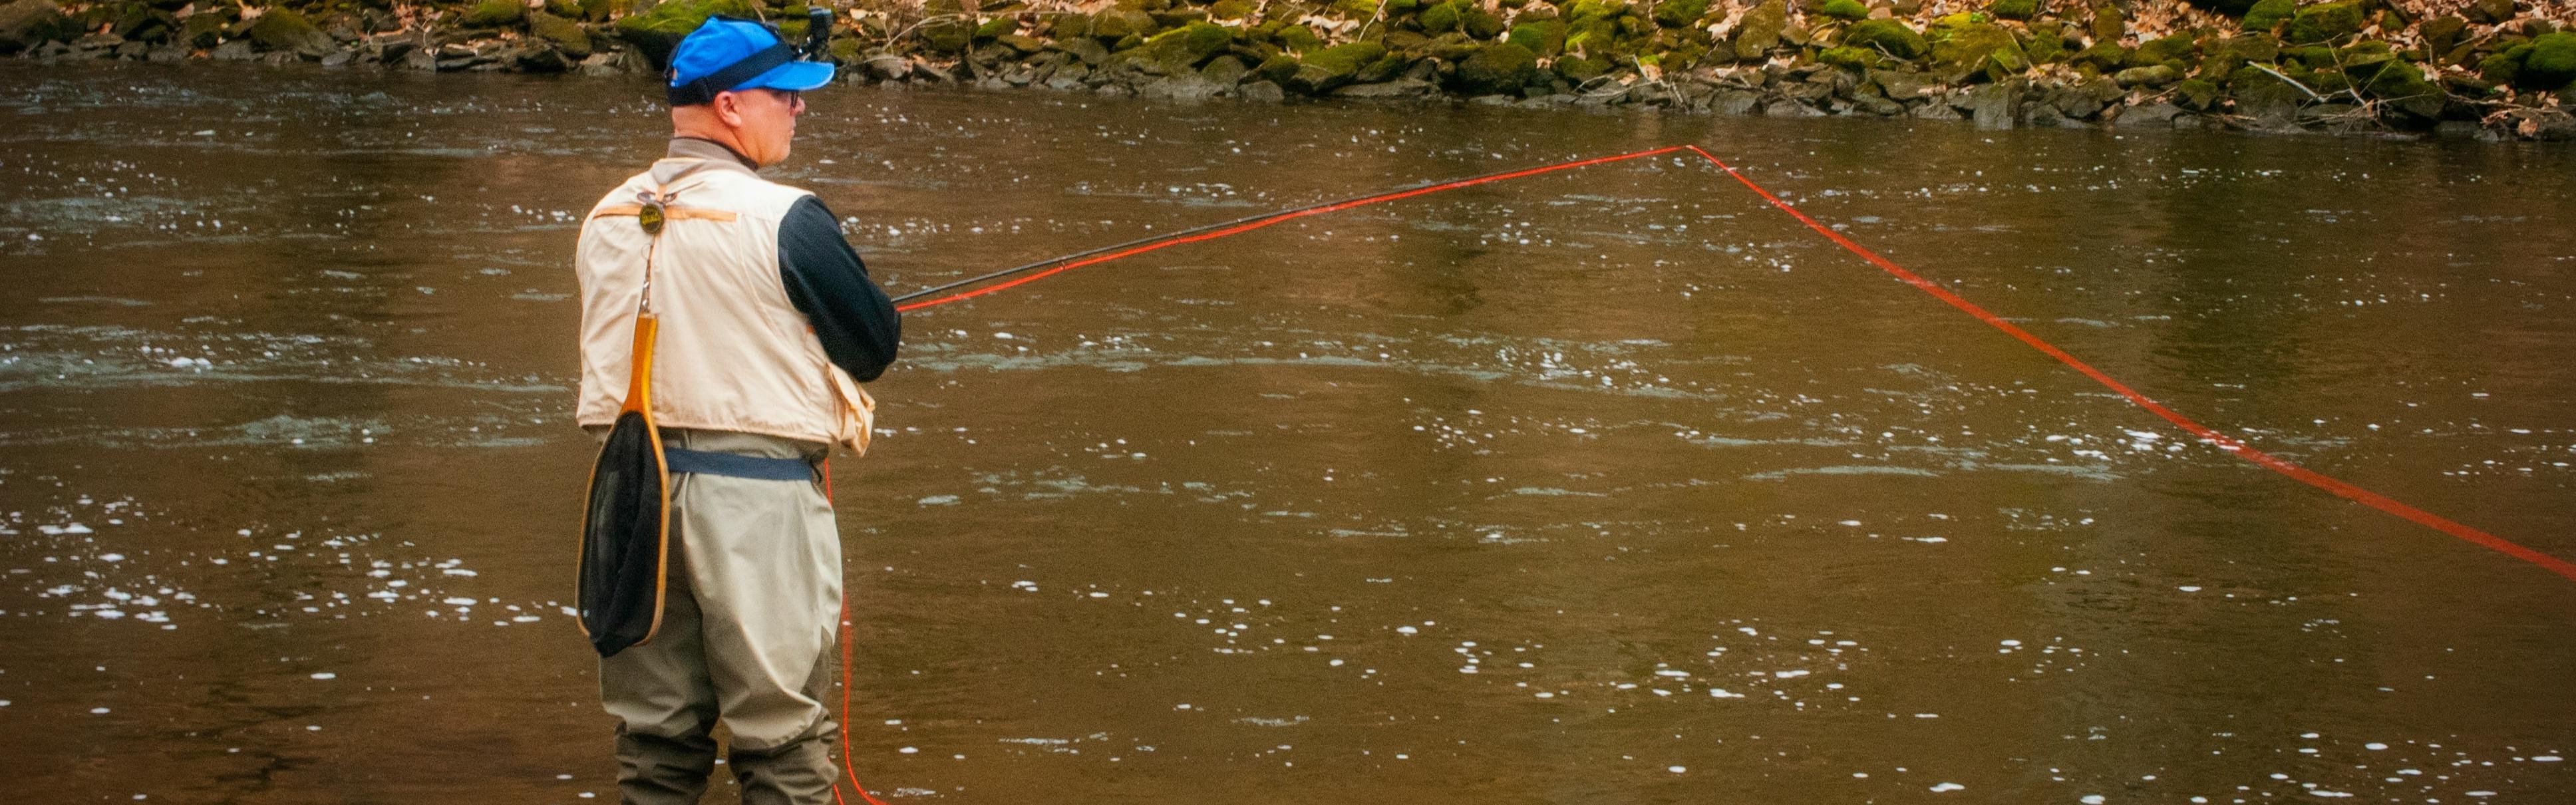 A man with waders and a fishing vest stands in a river. He is casting his fly rod and has a fishing net attached to his back.